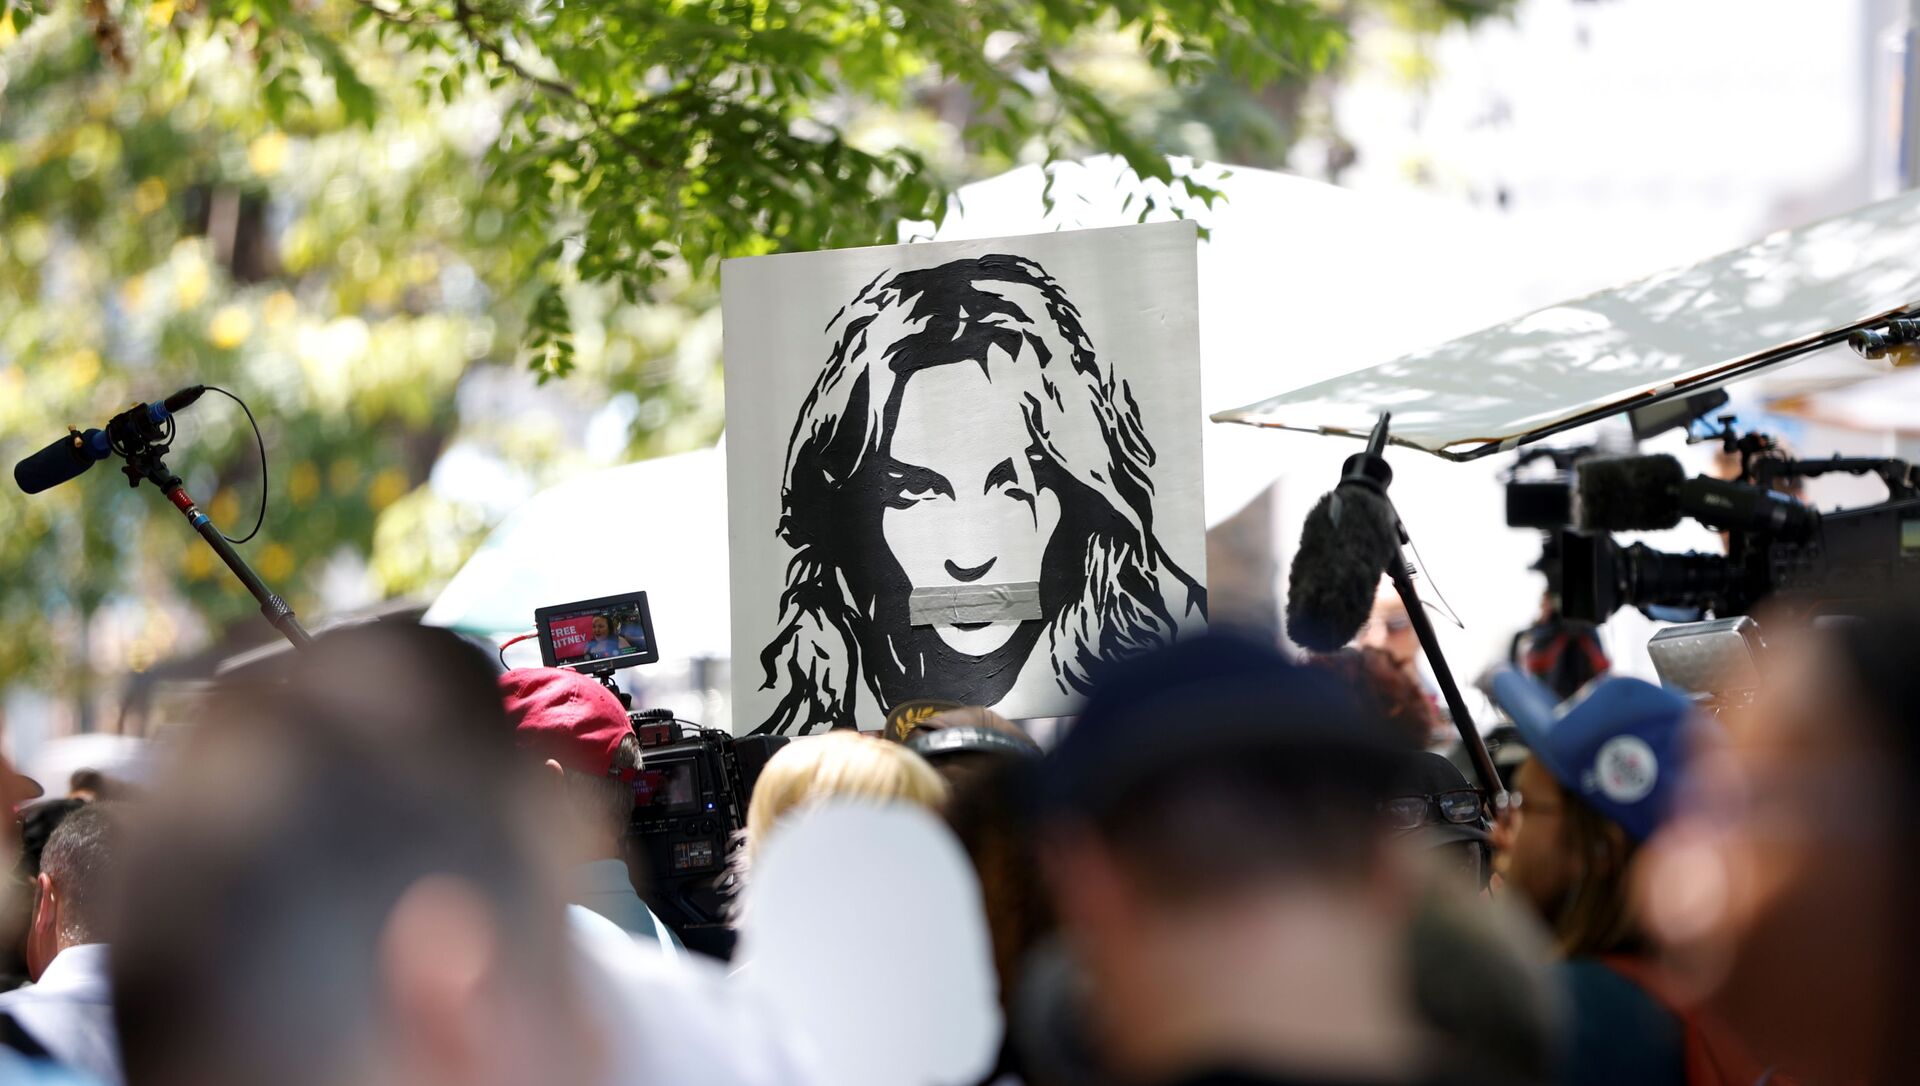 People protest in support of pop star Britney Spears on the day of a conservatorship case hearing at Stanley Mosk Courthouse in Los Angeles, California, U.S. June 23, 2021 - Sputnik International, 1920, 01.07.2021